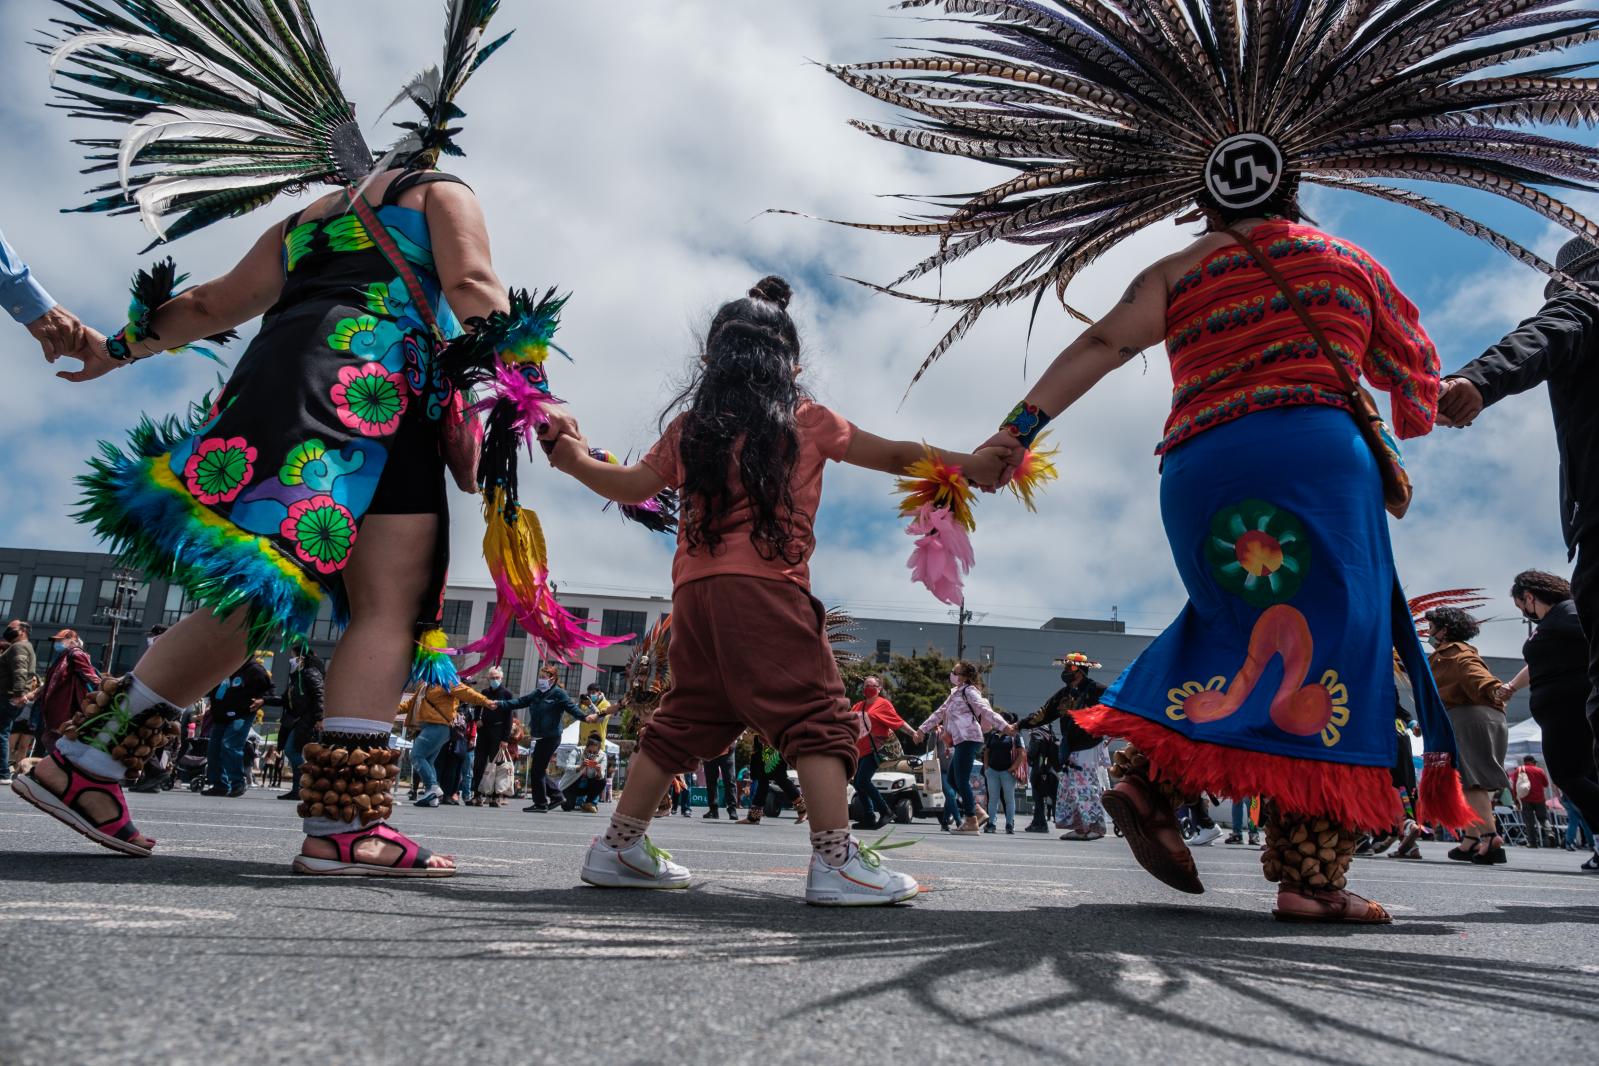 Traditional dancers and visitors perform a friendship dance to kickoff the beginning of Carnaval celebrations in San Francisco on Saturday, May 29, 2021. For the second year, CANA-Carnaval San Francisco will hold a community resource fair in place of its traditional parade and festival. The event will celebrate the resilience of those who have been disproportionately affected by the pandemic and provide numerous health and economic equity resources.